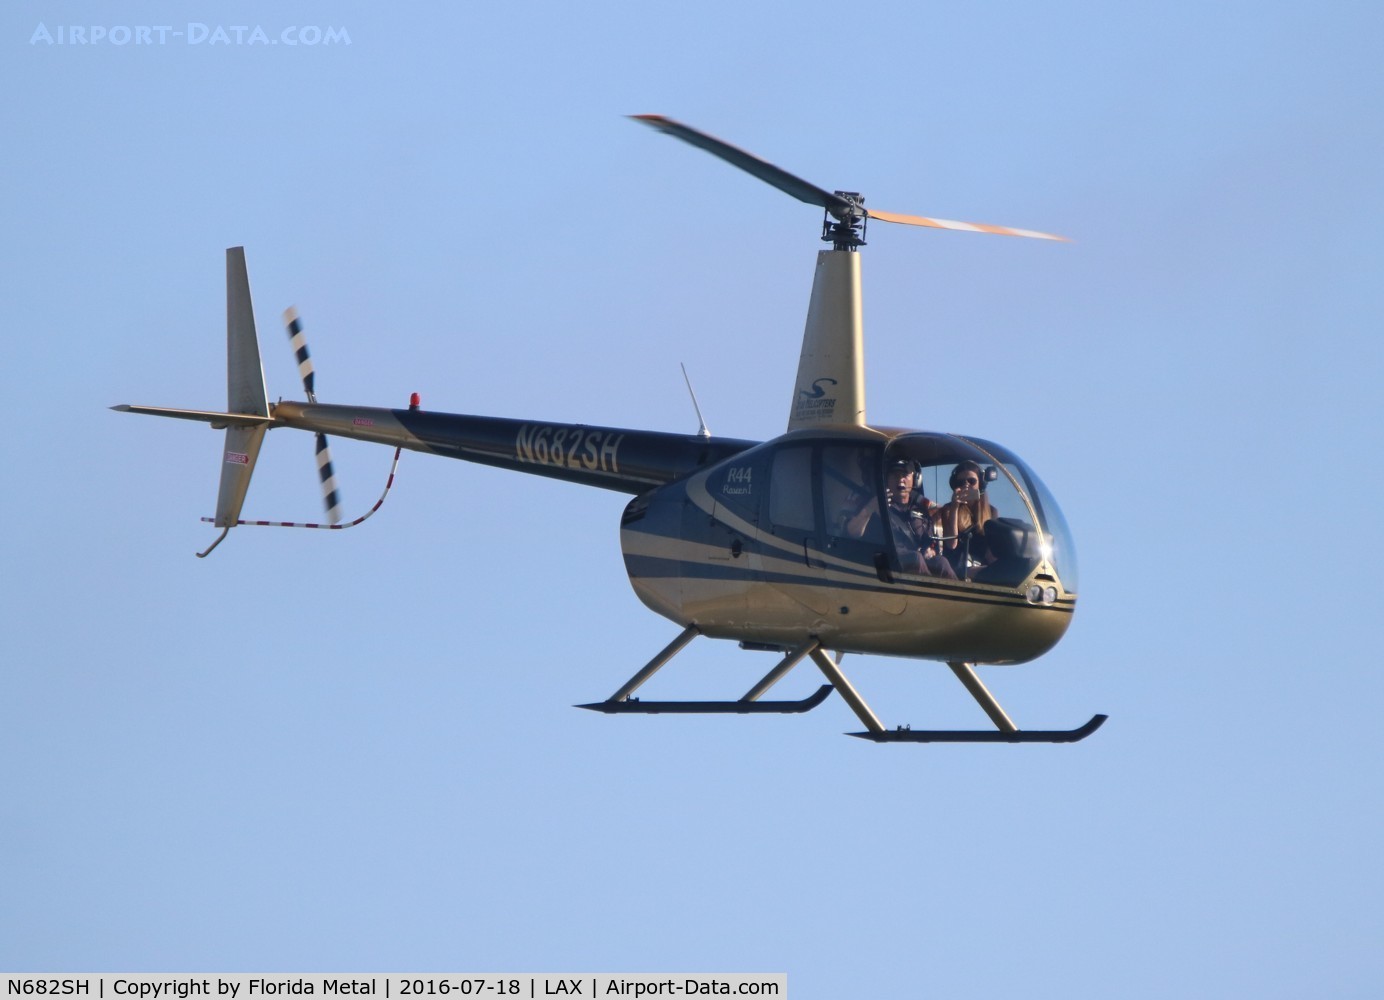 N682SH, 2001 Robinson R44 C/N 1013, Robinson R44 over Dockweiler Beach at the departure end of LAX